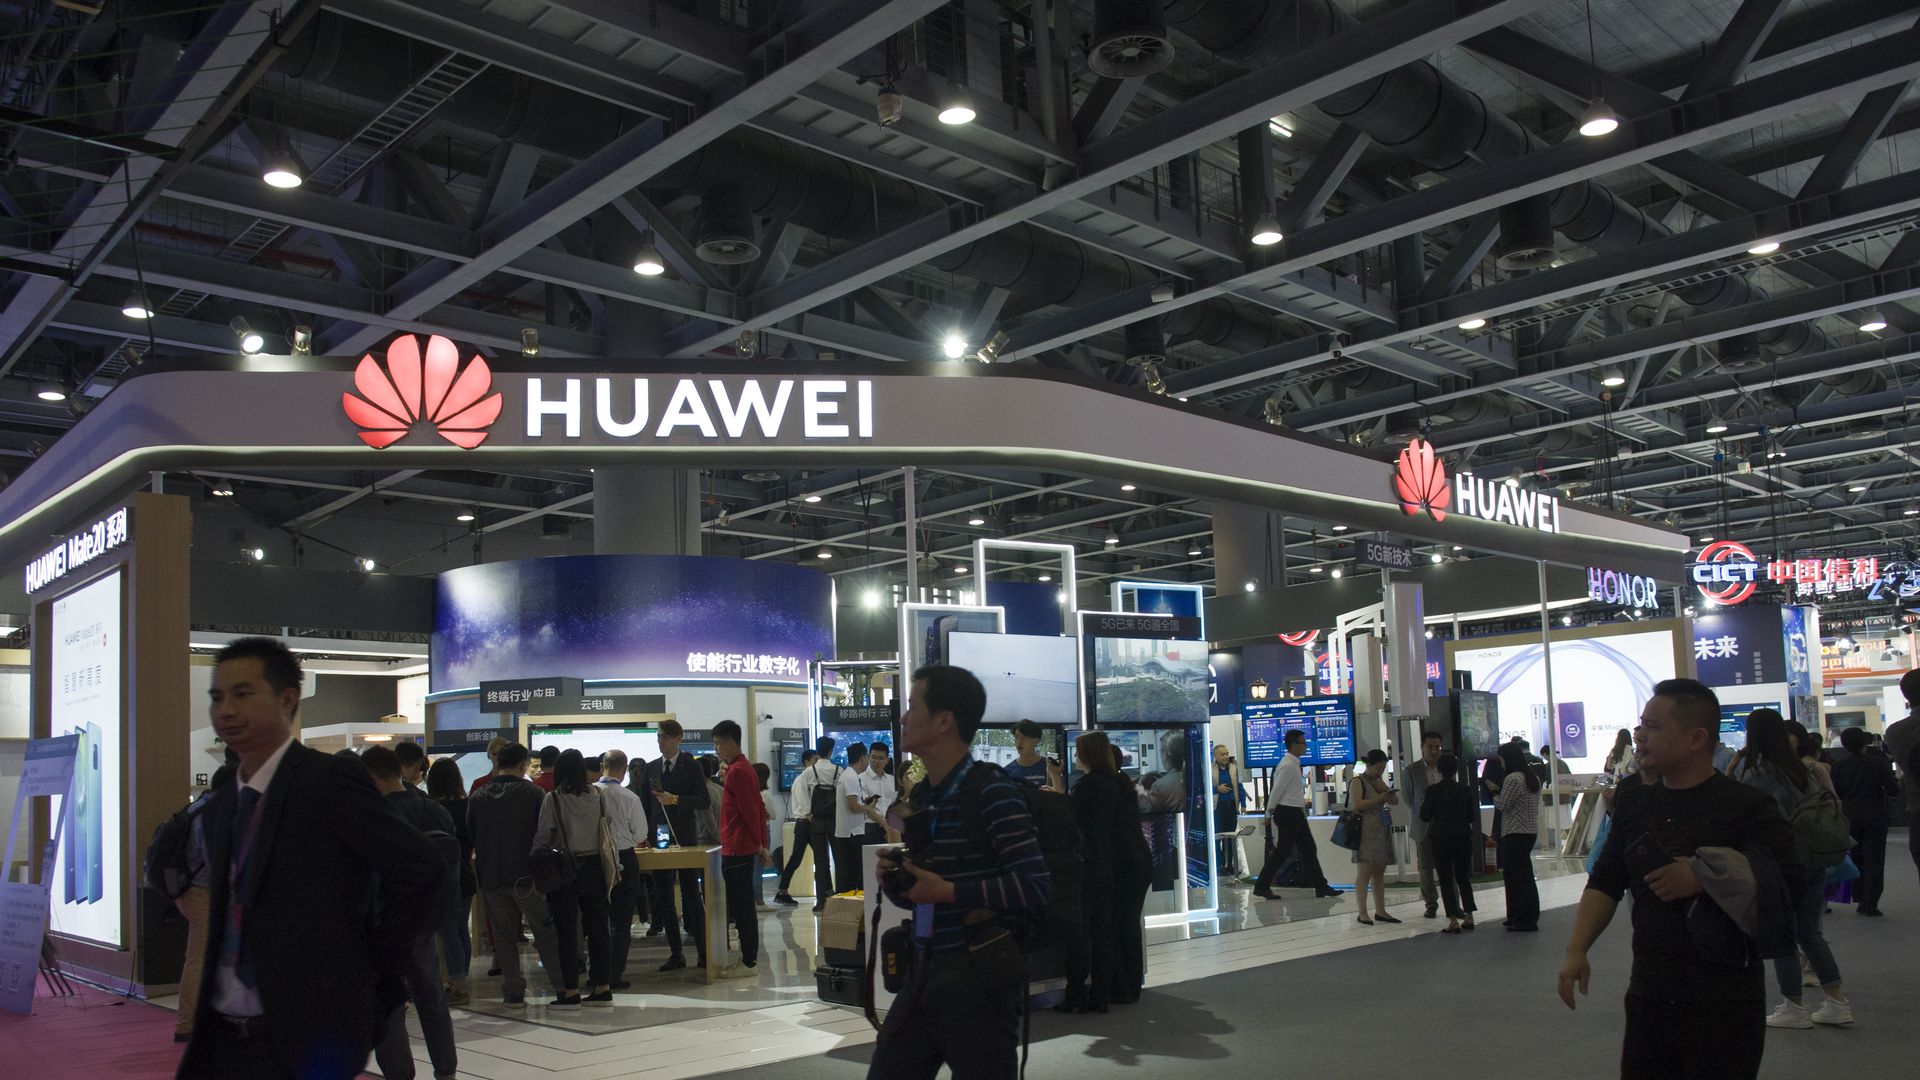 Huawei booth at a mobile tech conference.